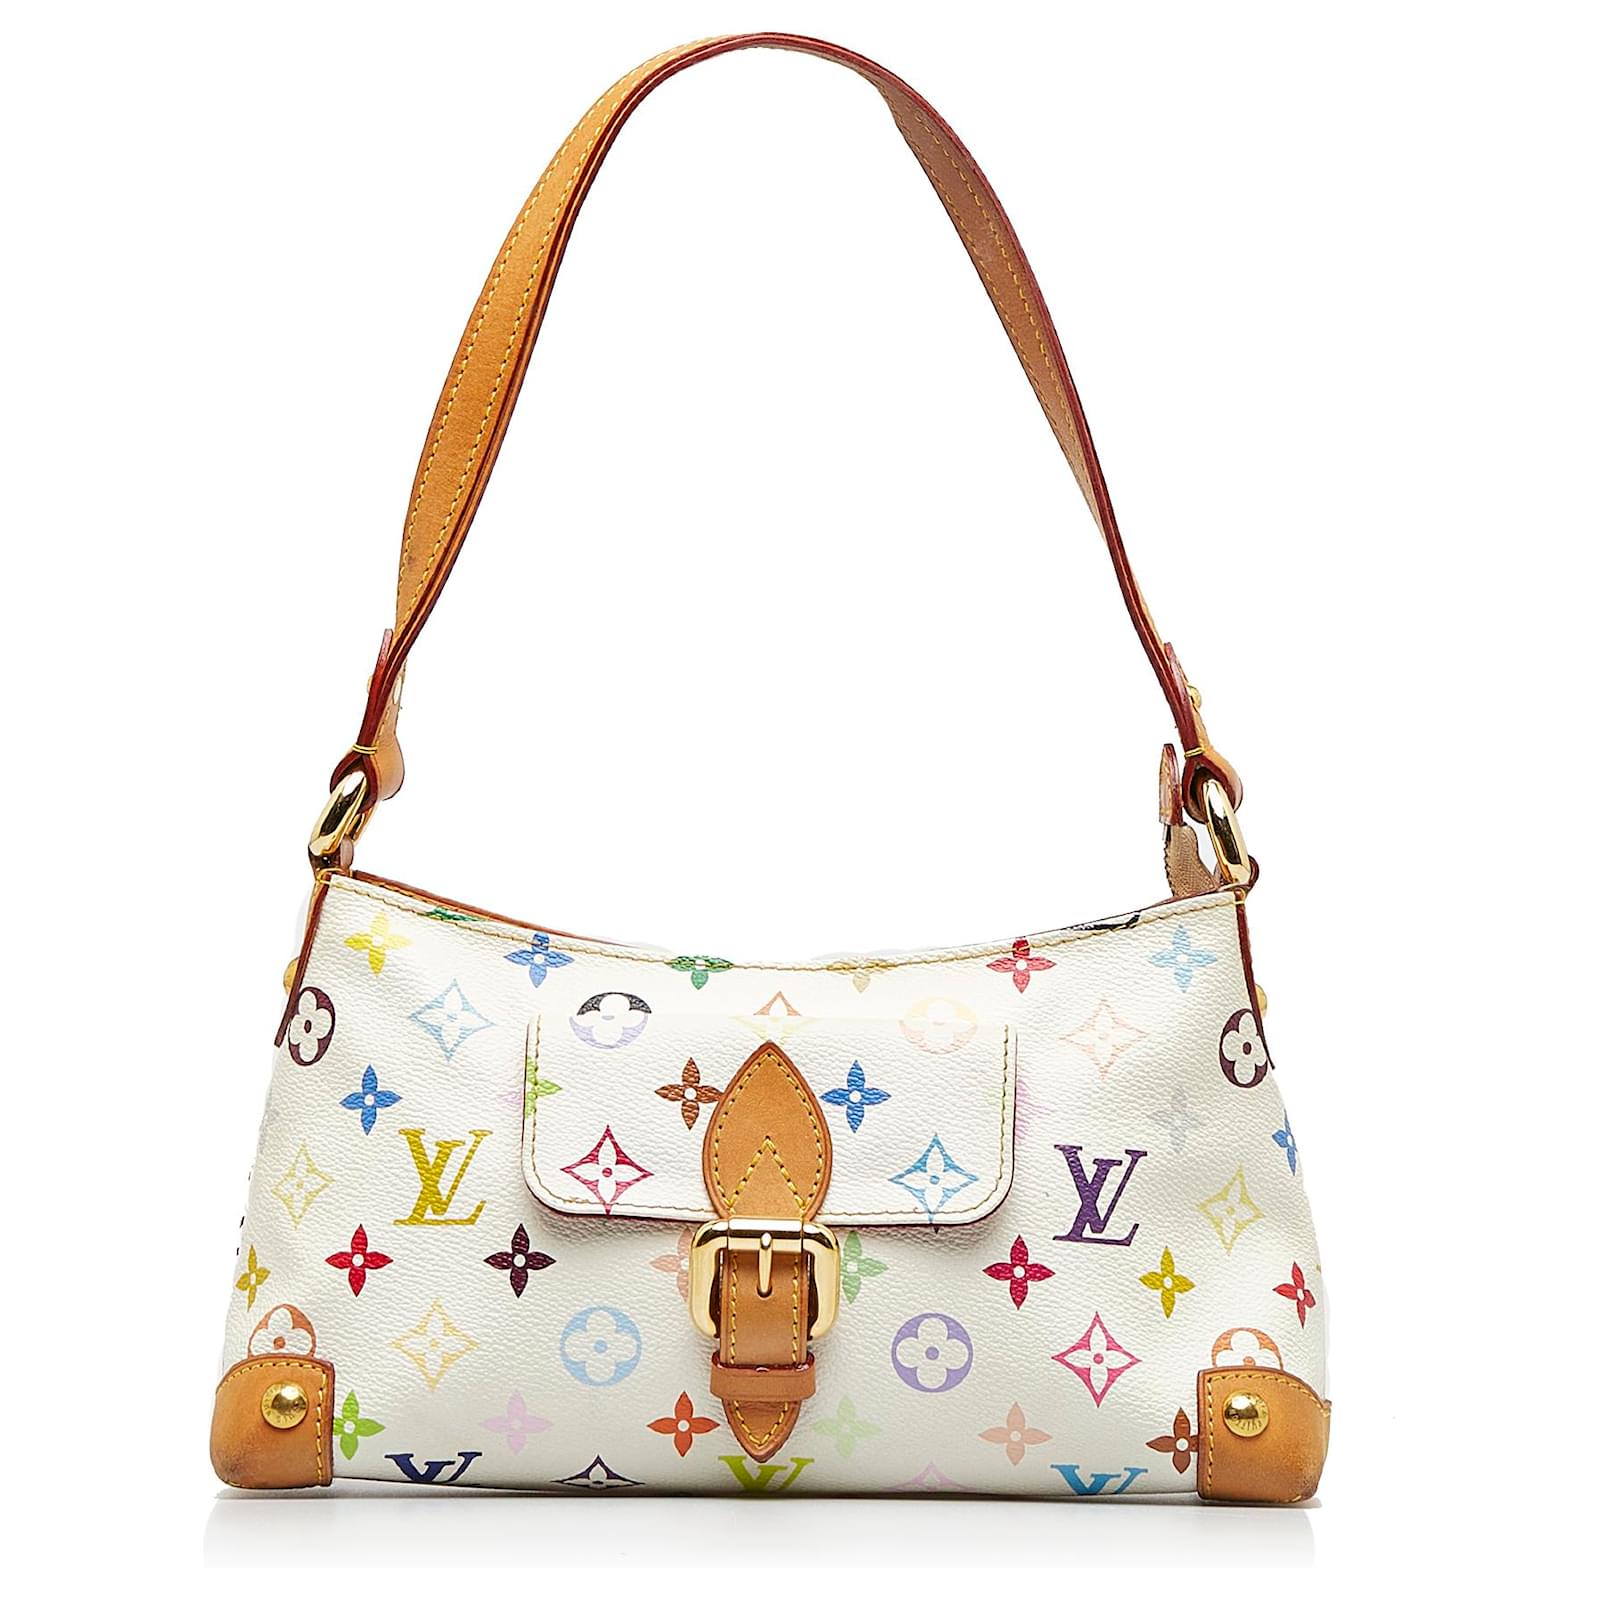 This adorable Louis Vuitton Eliza Multicoloured Tote is ideal for